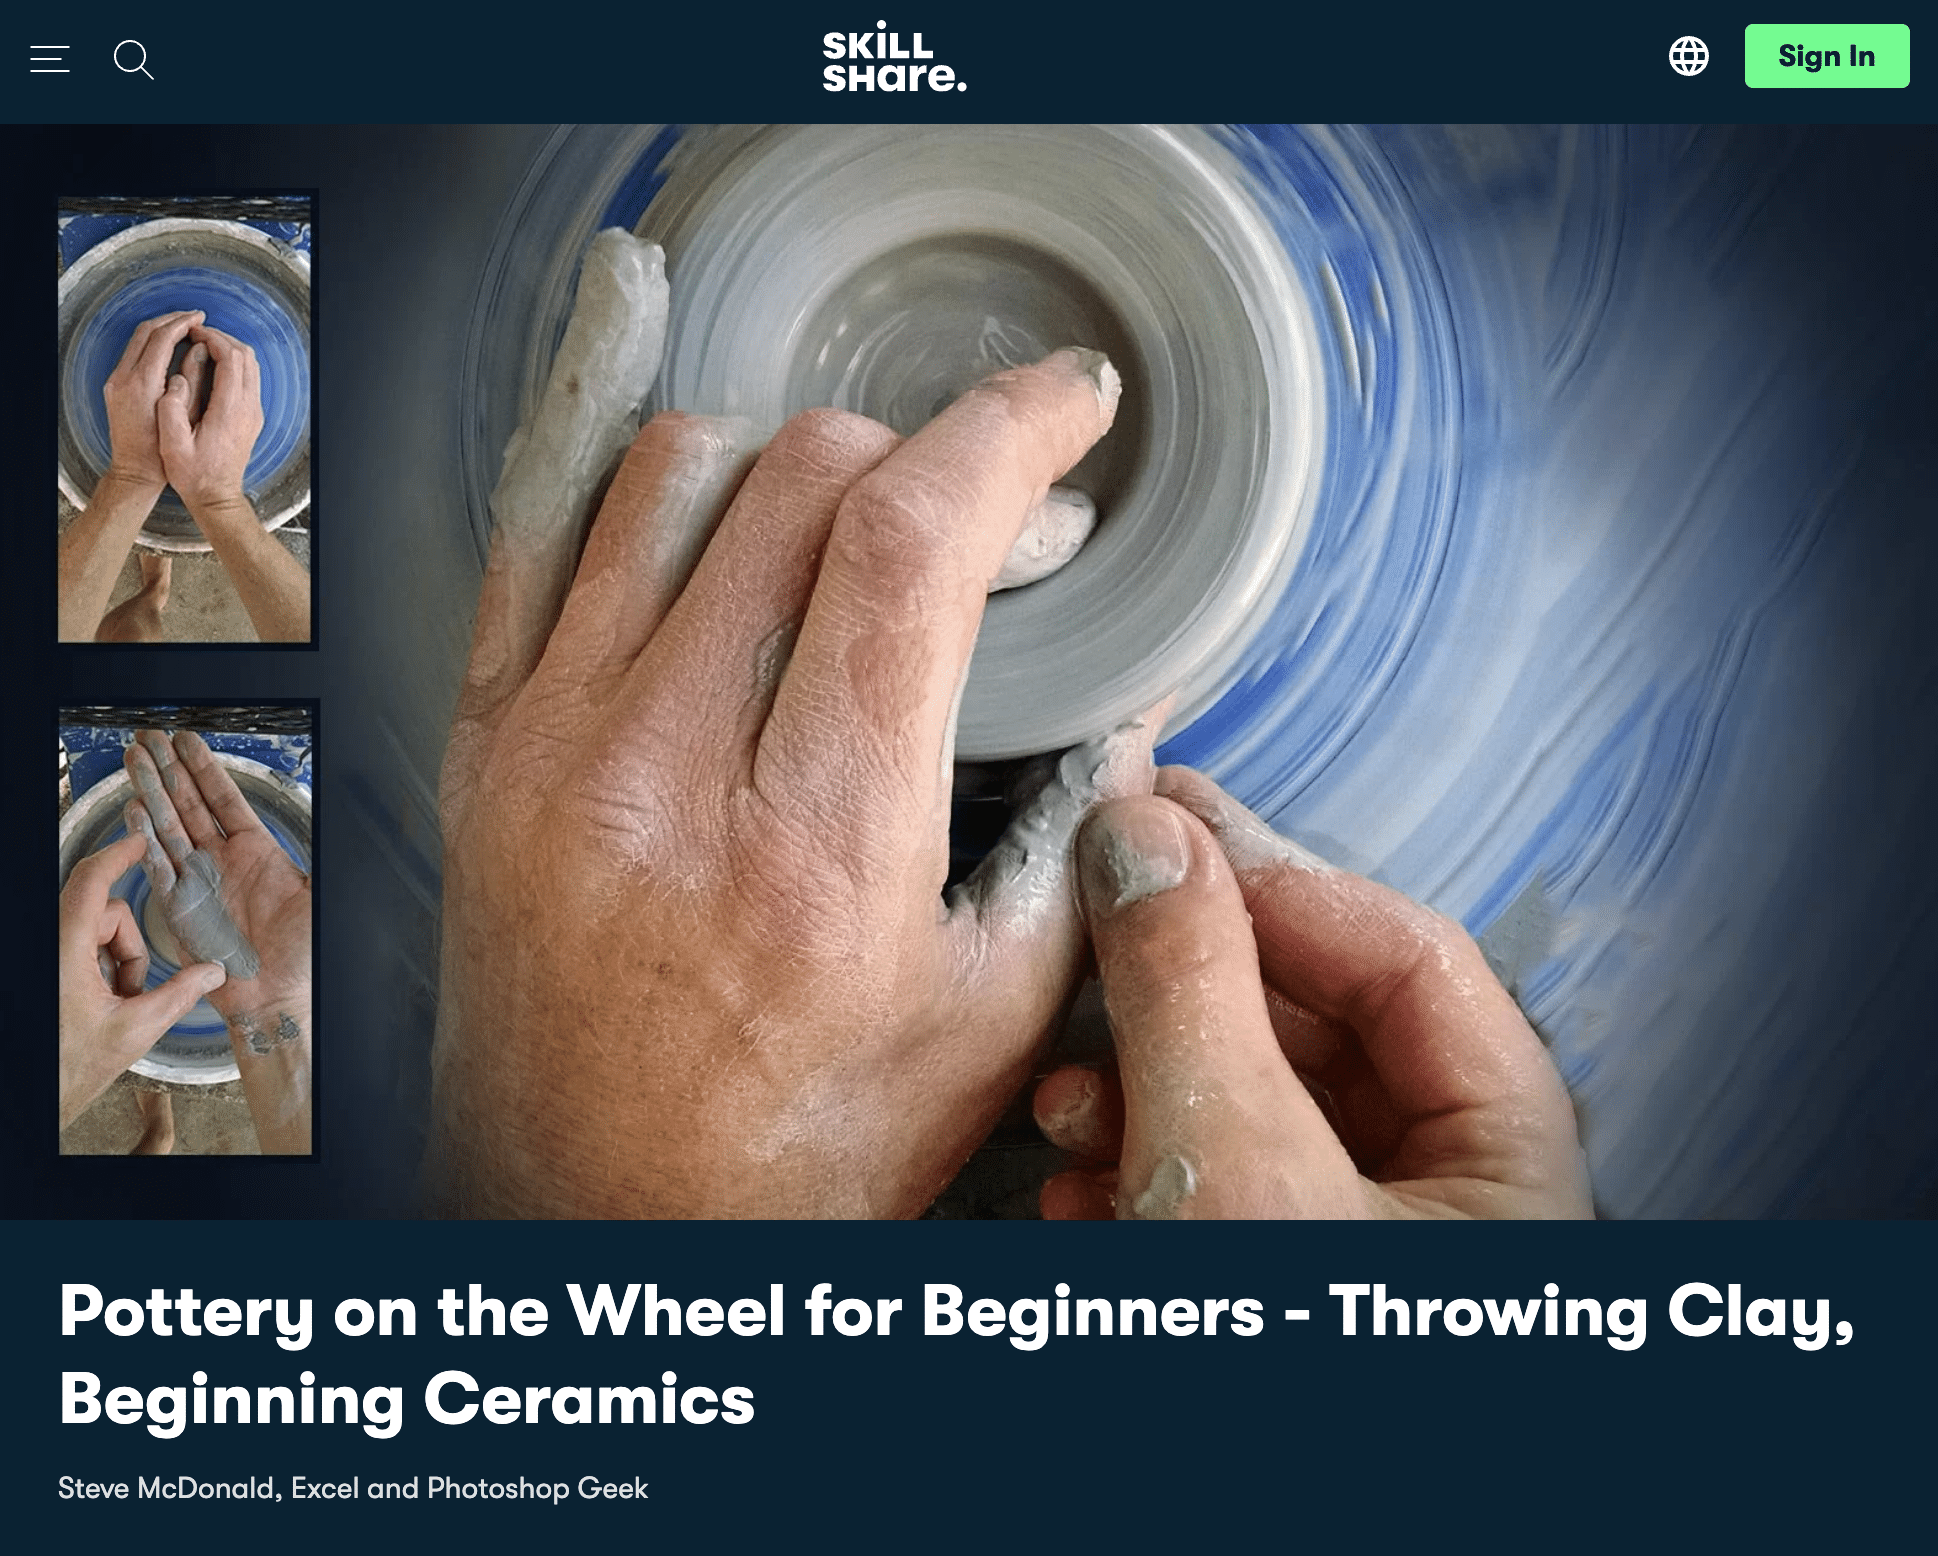 Pottery on the Wheel for Beginners